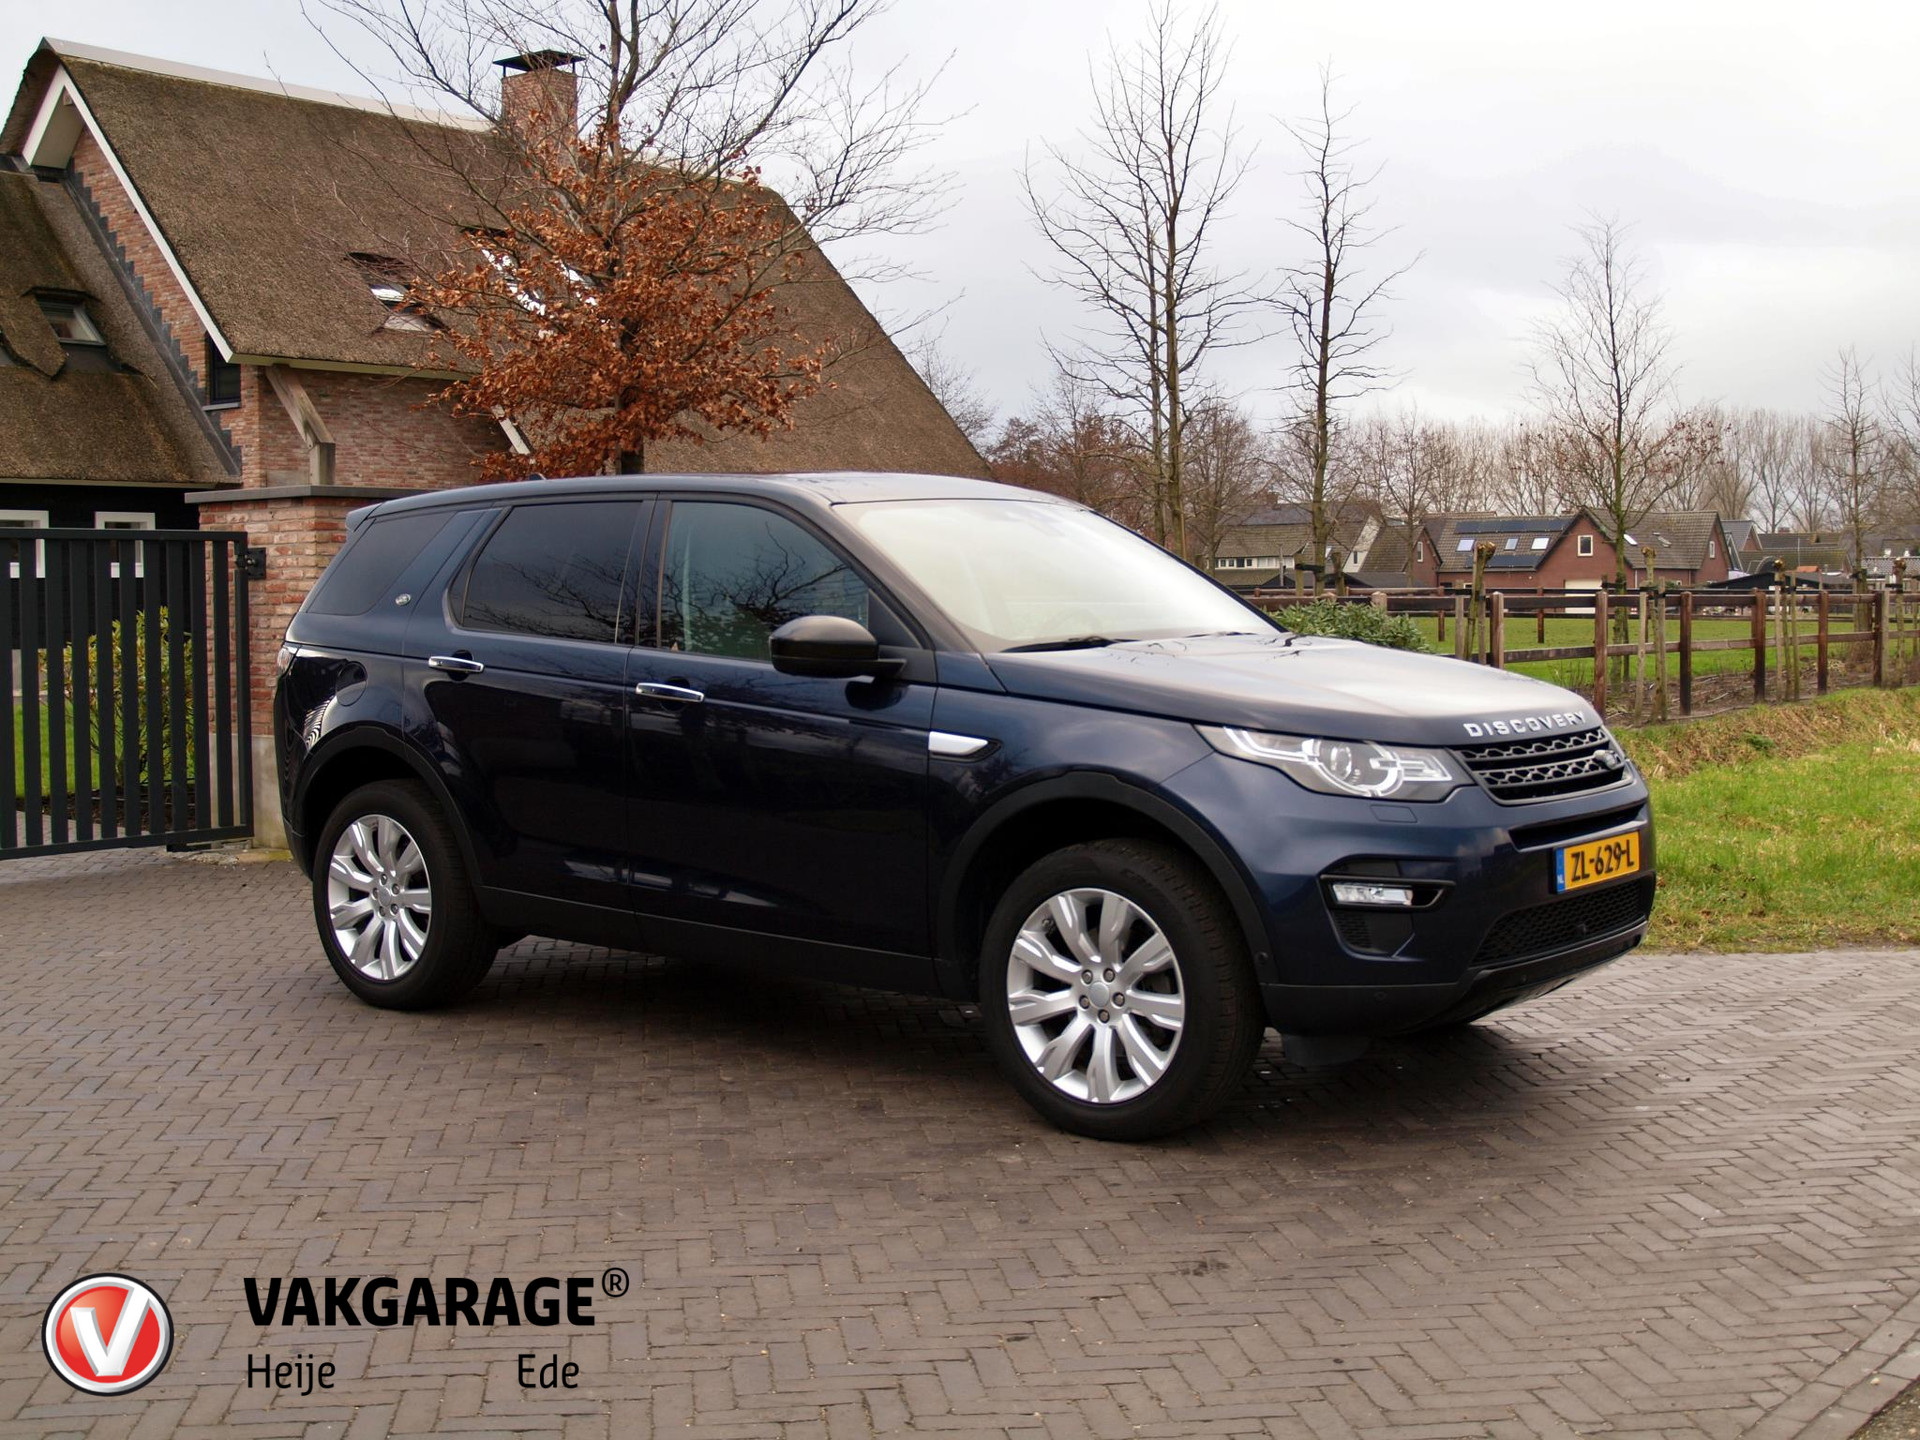 Land Rover Discovery Sport 2.0 Si4 4WD HSE Luxury | Camera | Cruise Control | Bluetooth | Trekhaak | bij viaBOVAG.nl